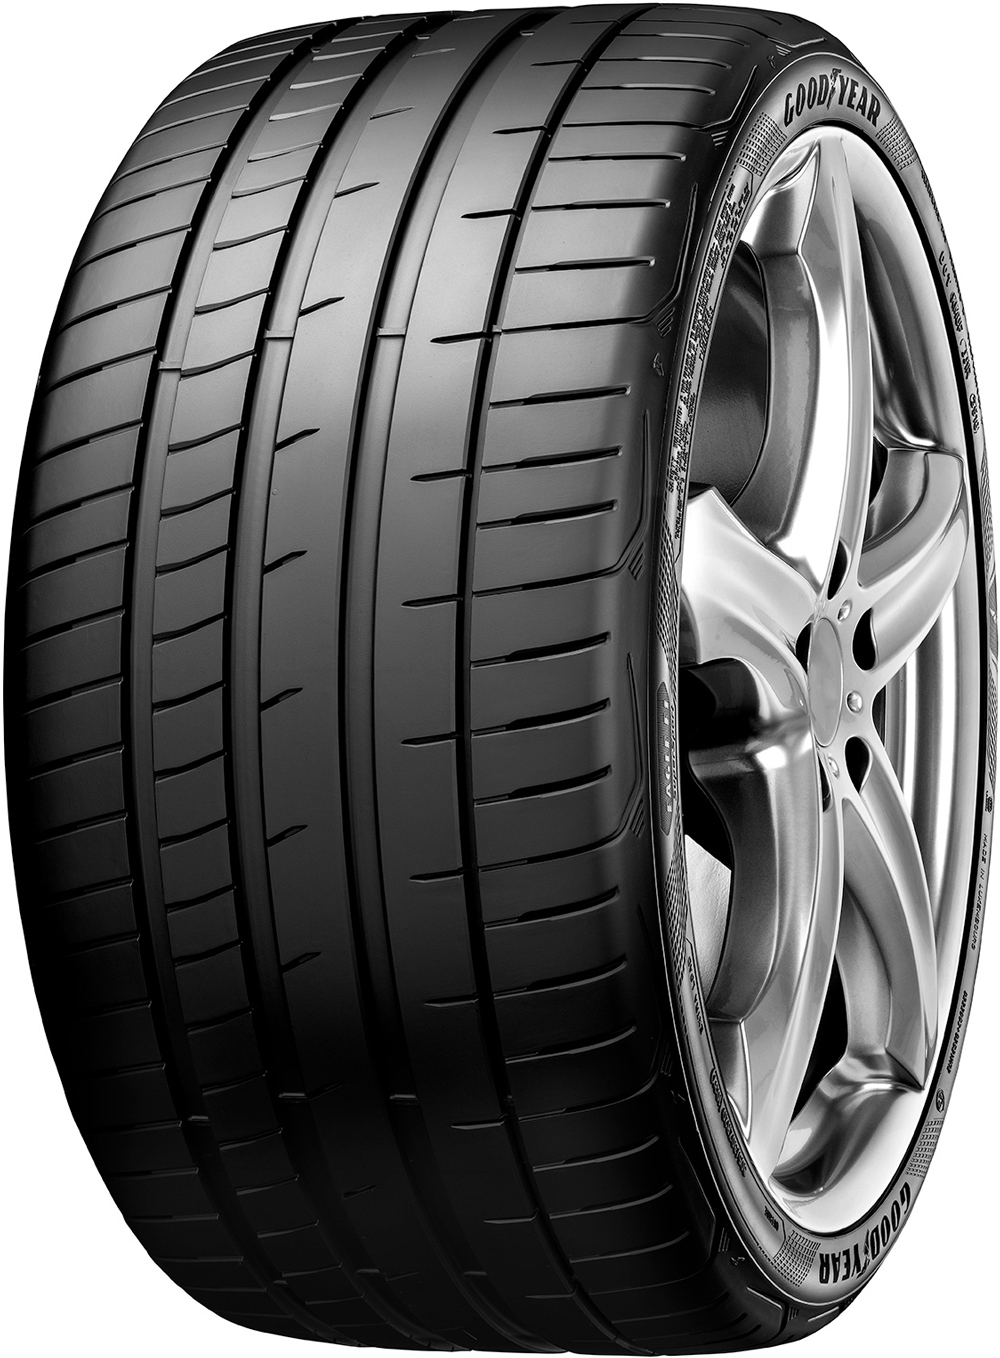 Anvelope auto GOODYEAR EAG F1 SUPERSPORT XL FP DOT 2020 225/45 R18 95Y